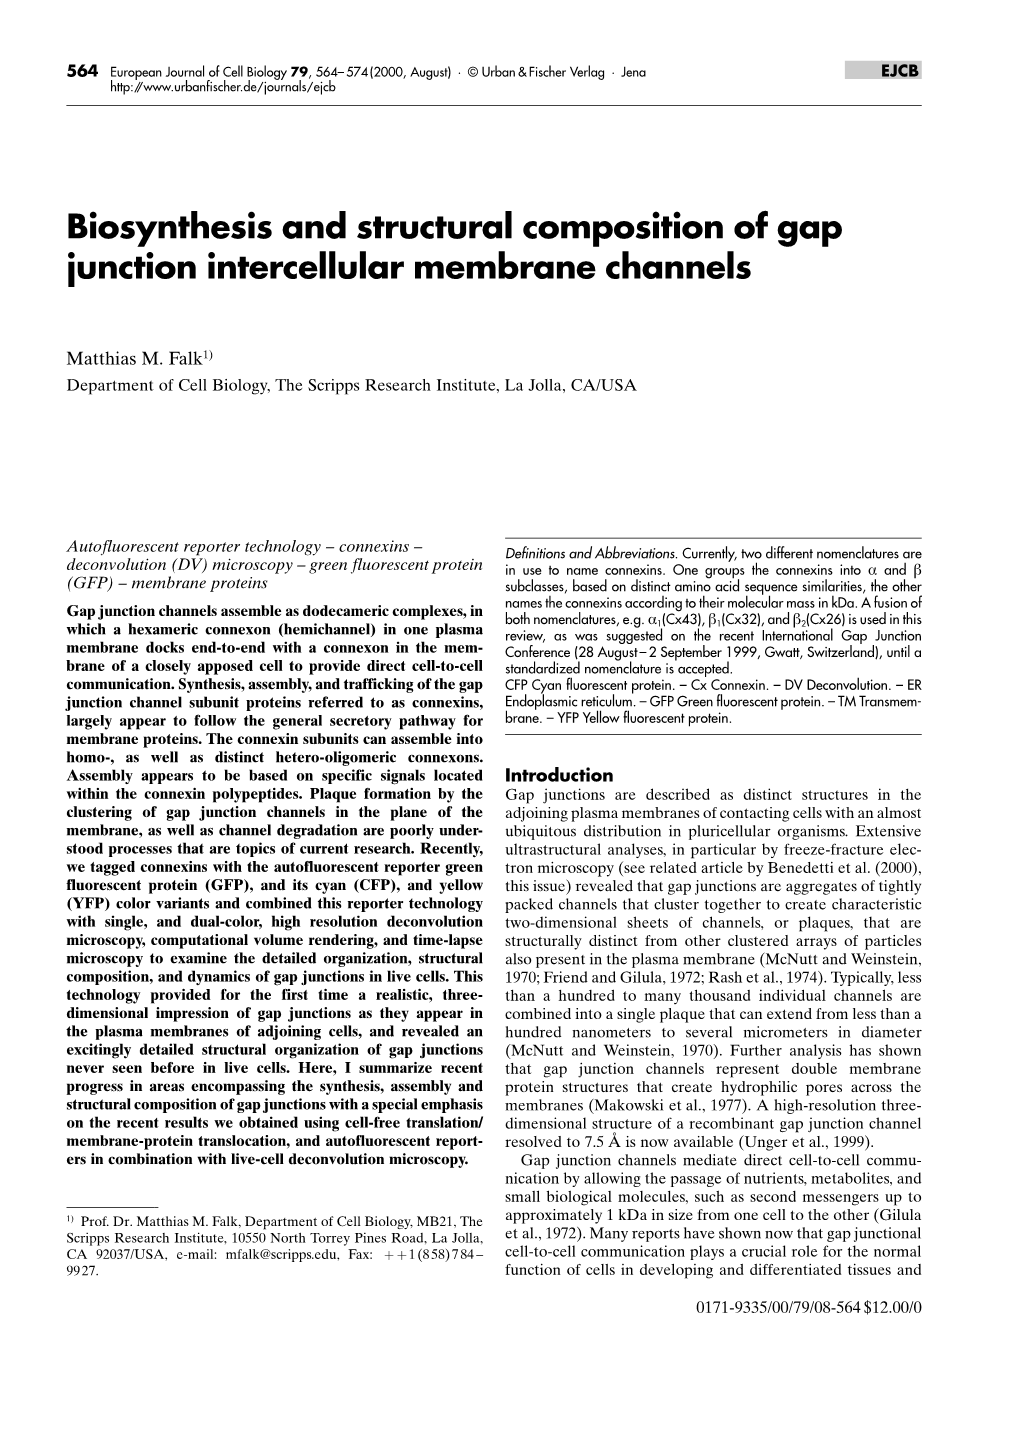 Biosynthesis and Structural Composition of Gap Junction Intercellular Membrane Channels